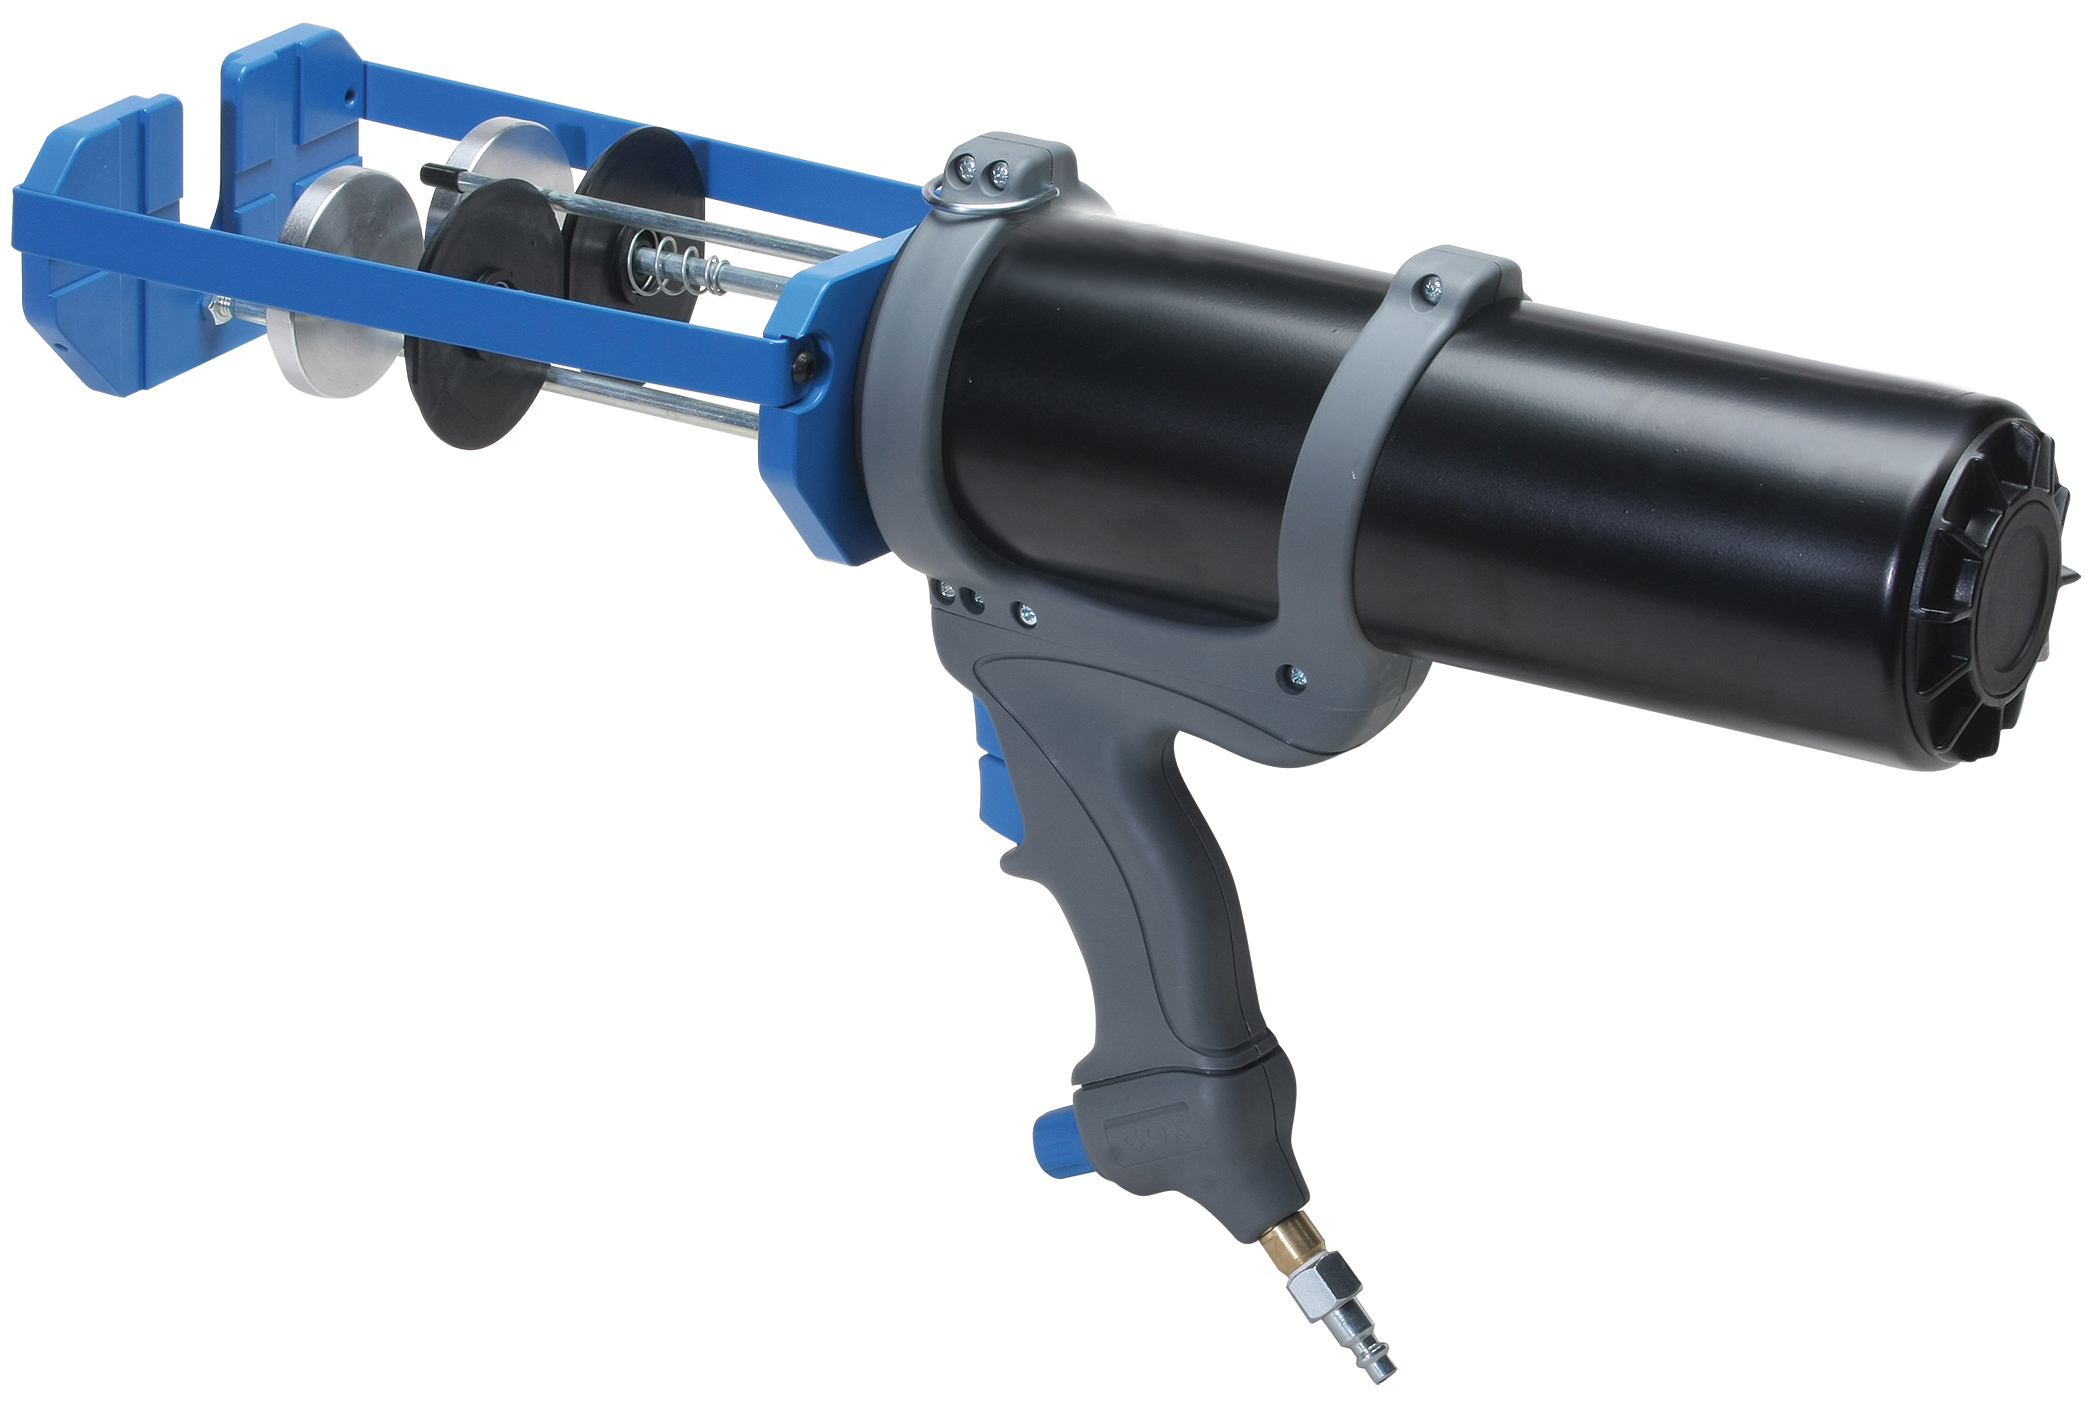 COX and MK sealant and adhesive dispensers | medmix